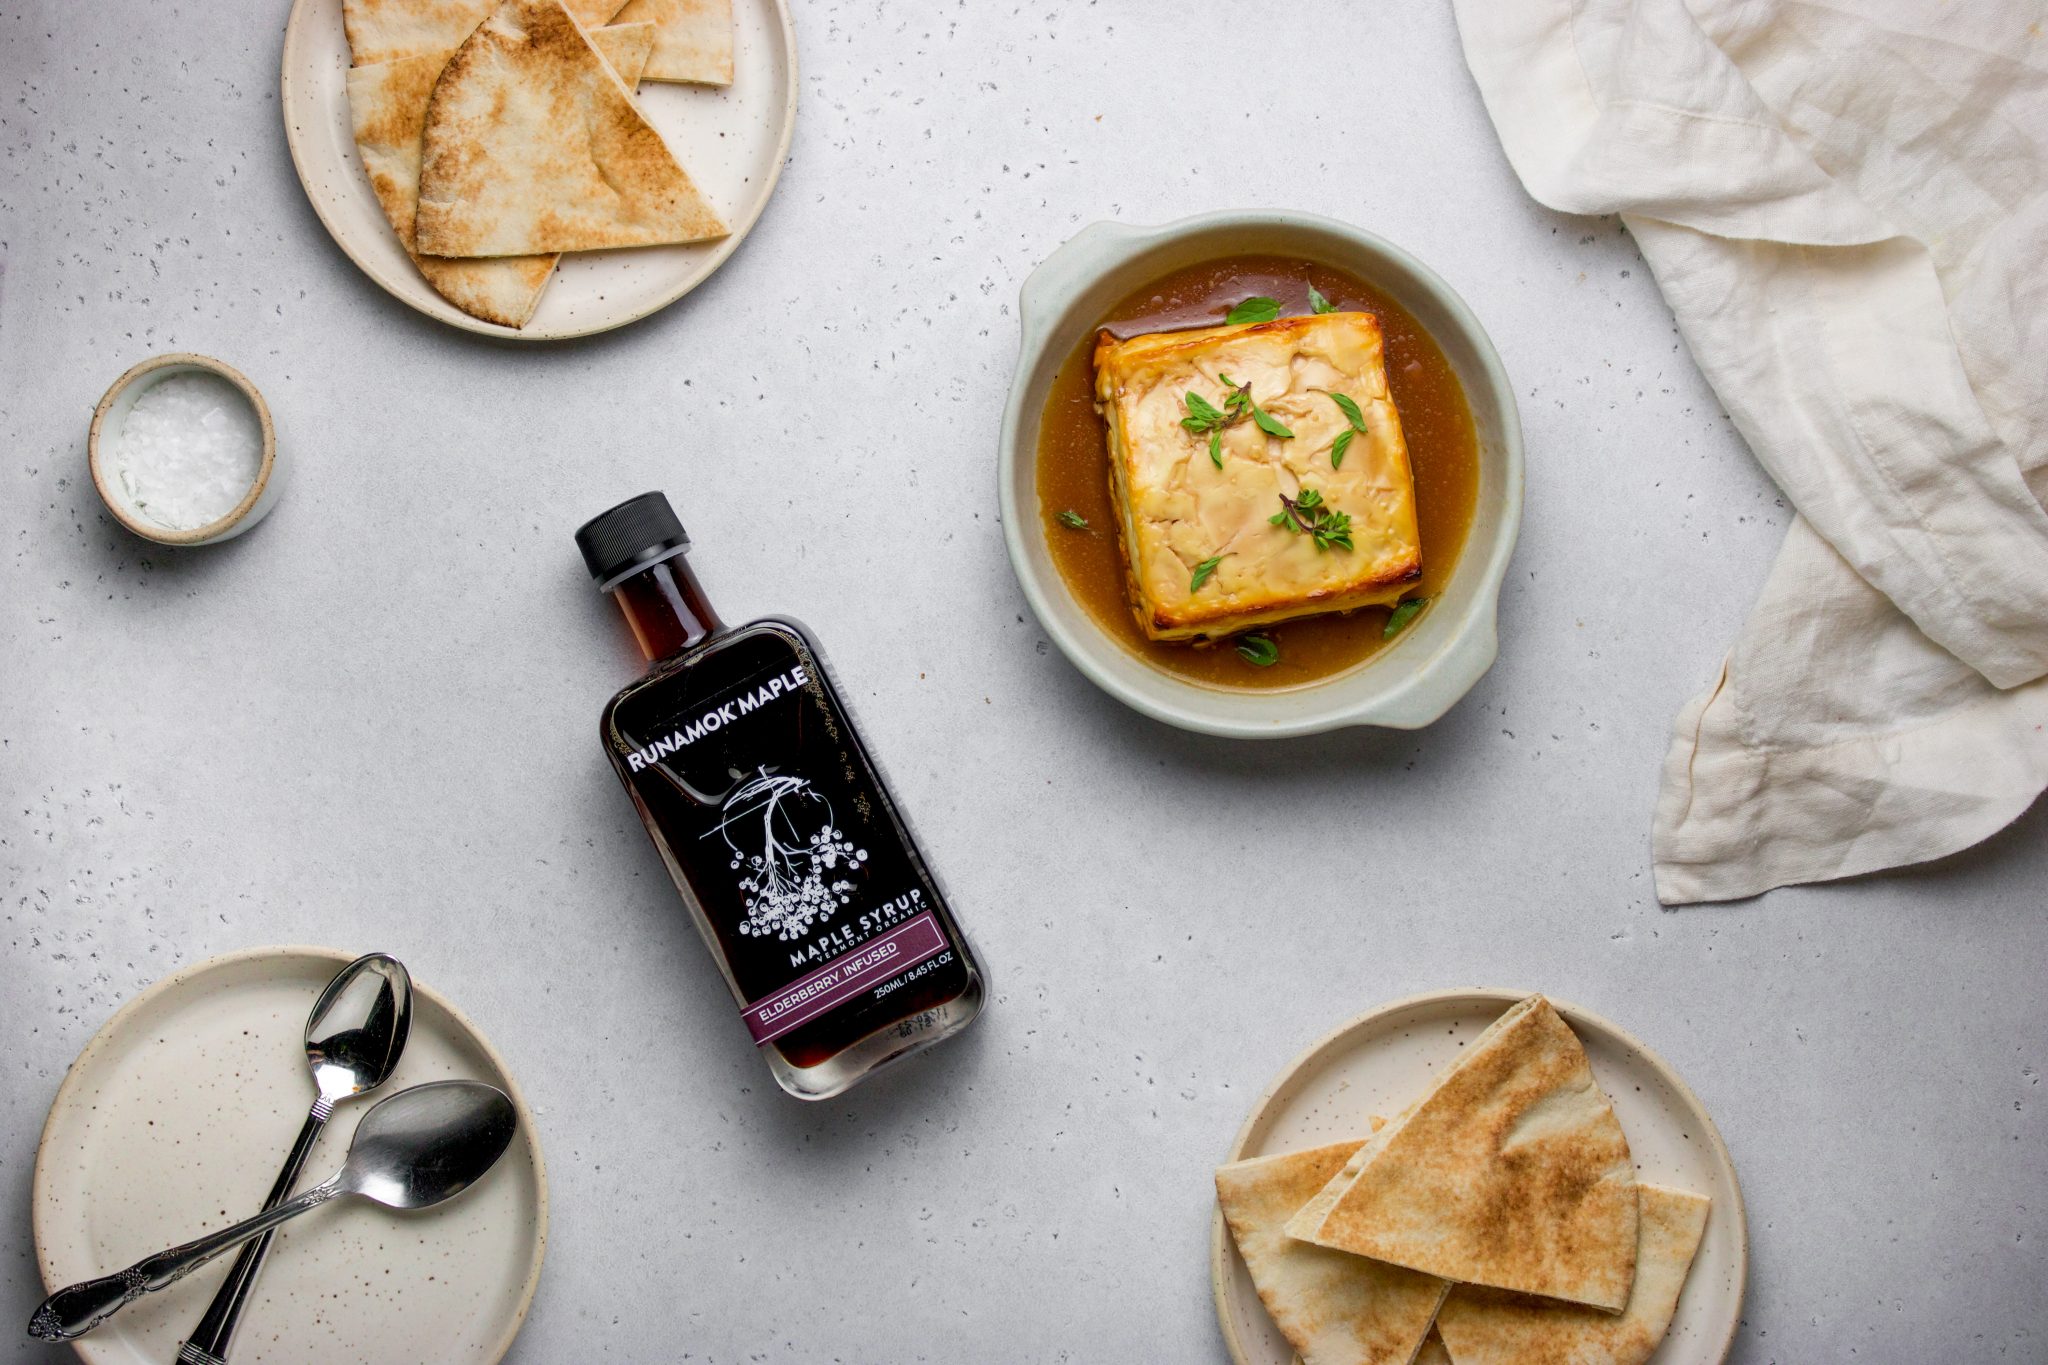 Baked Feta With Elderberry Infused Maple Syrup